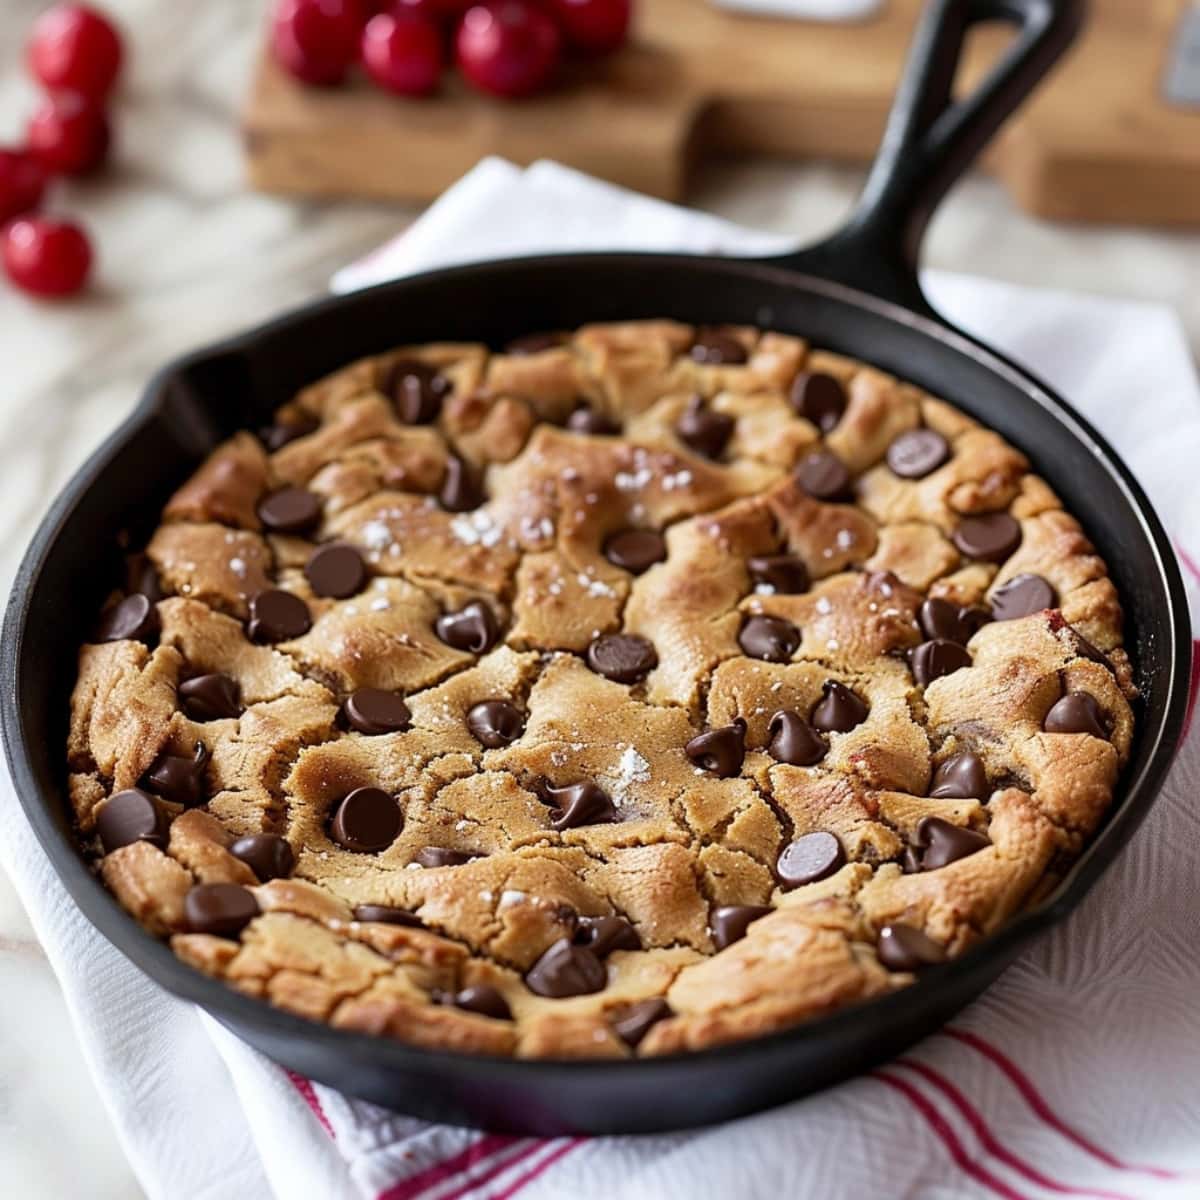 Baked chocolate chip cookie in an iron skillet.